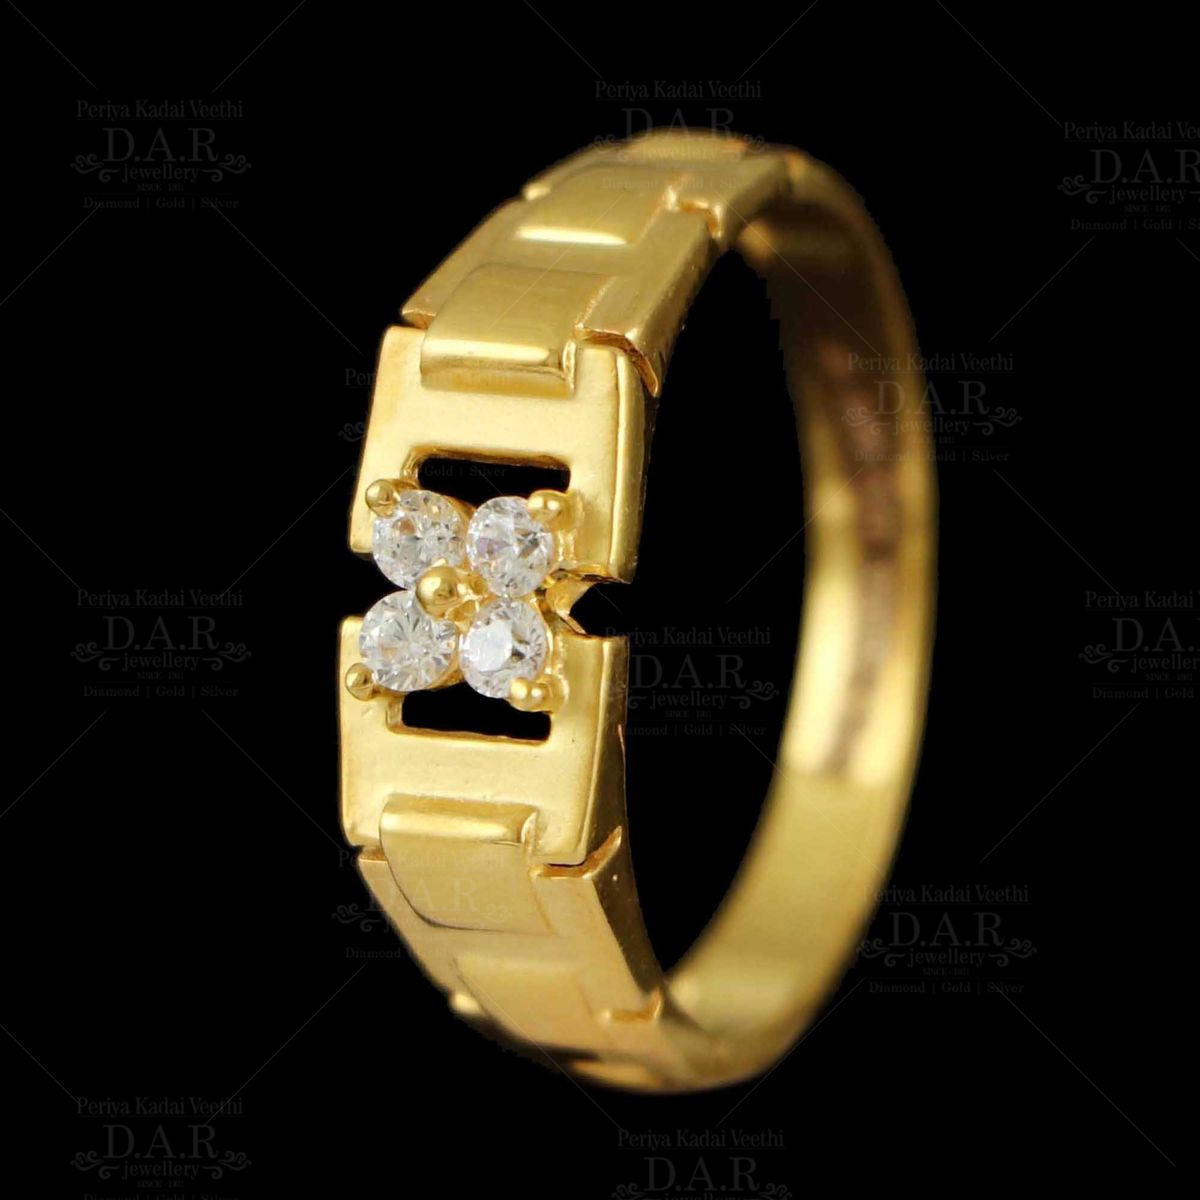 100% Party Wear Men Gold Ring, Size: Free, 3gm at best price in Mumbai |  ID: 2852992012233